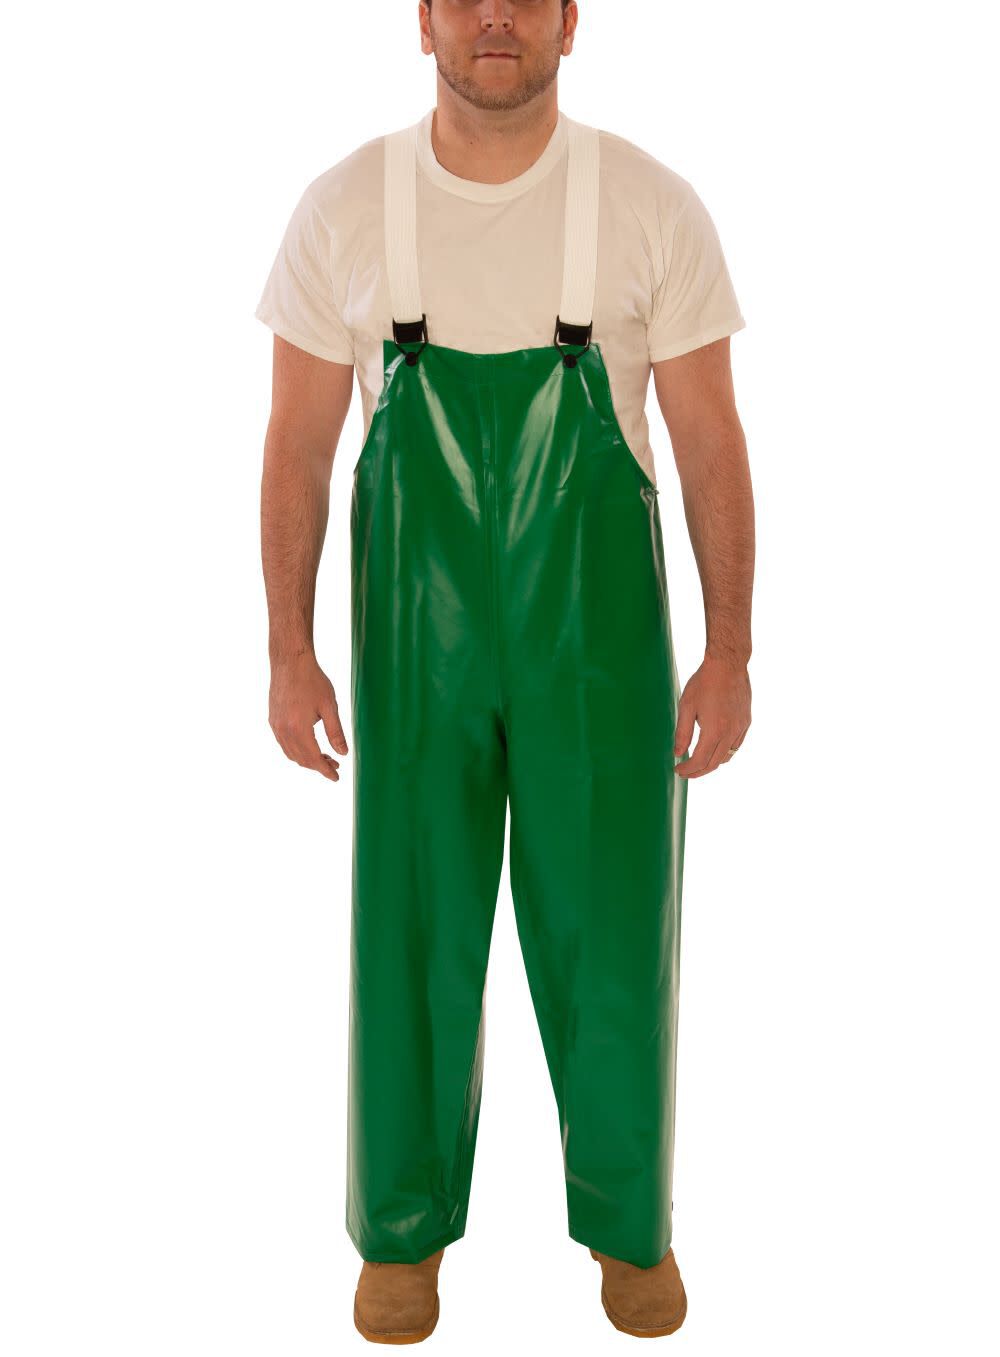 Safetyflex Overalls Green Large O41008.LG